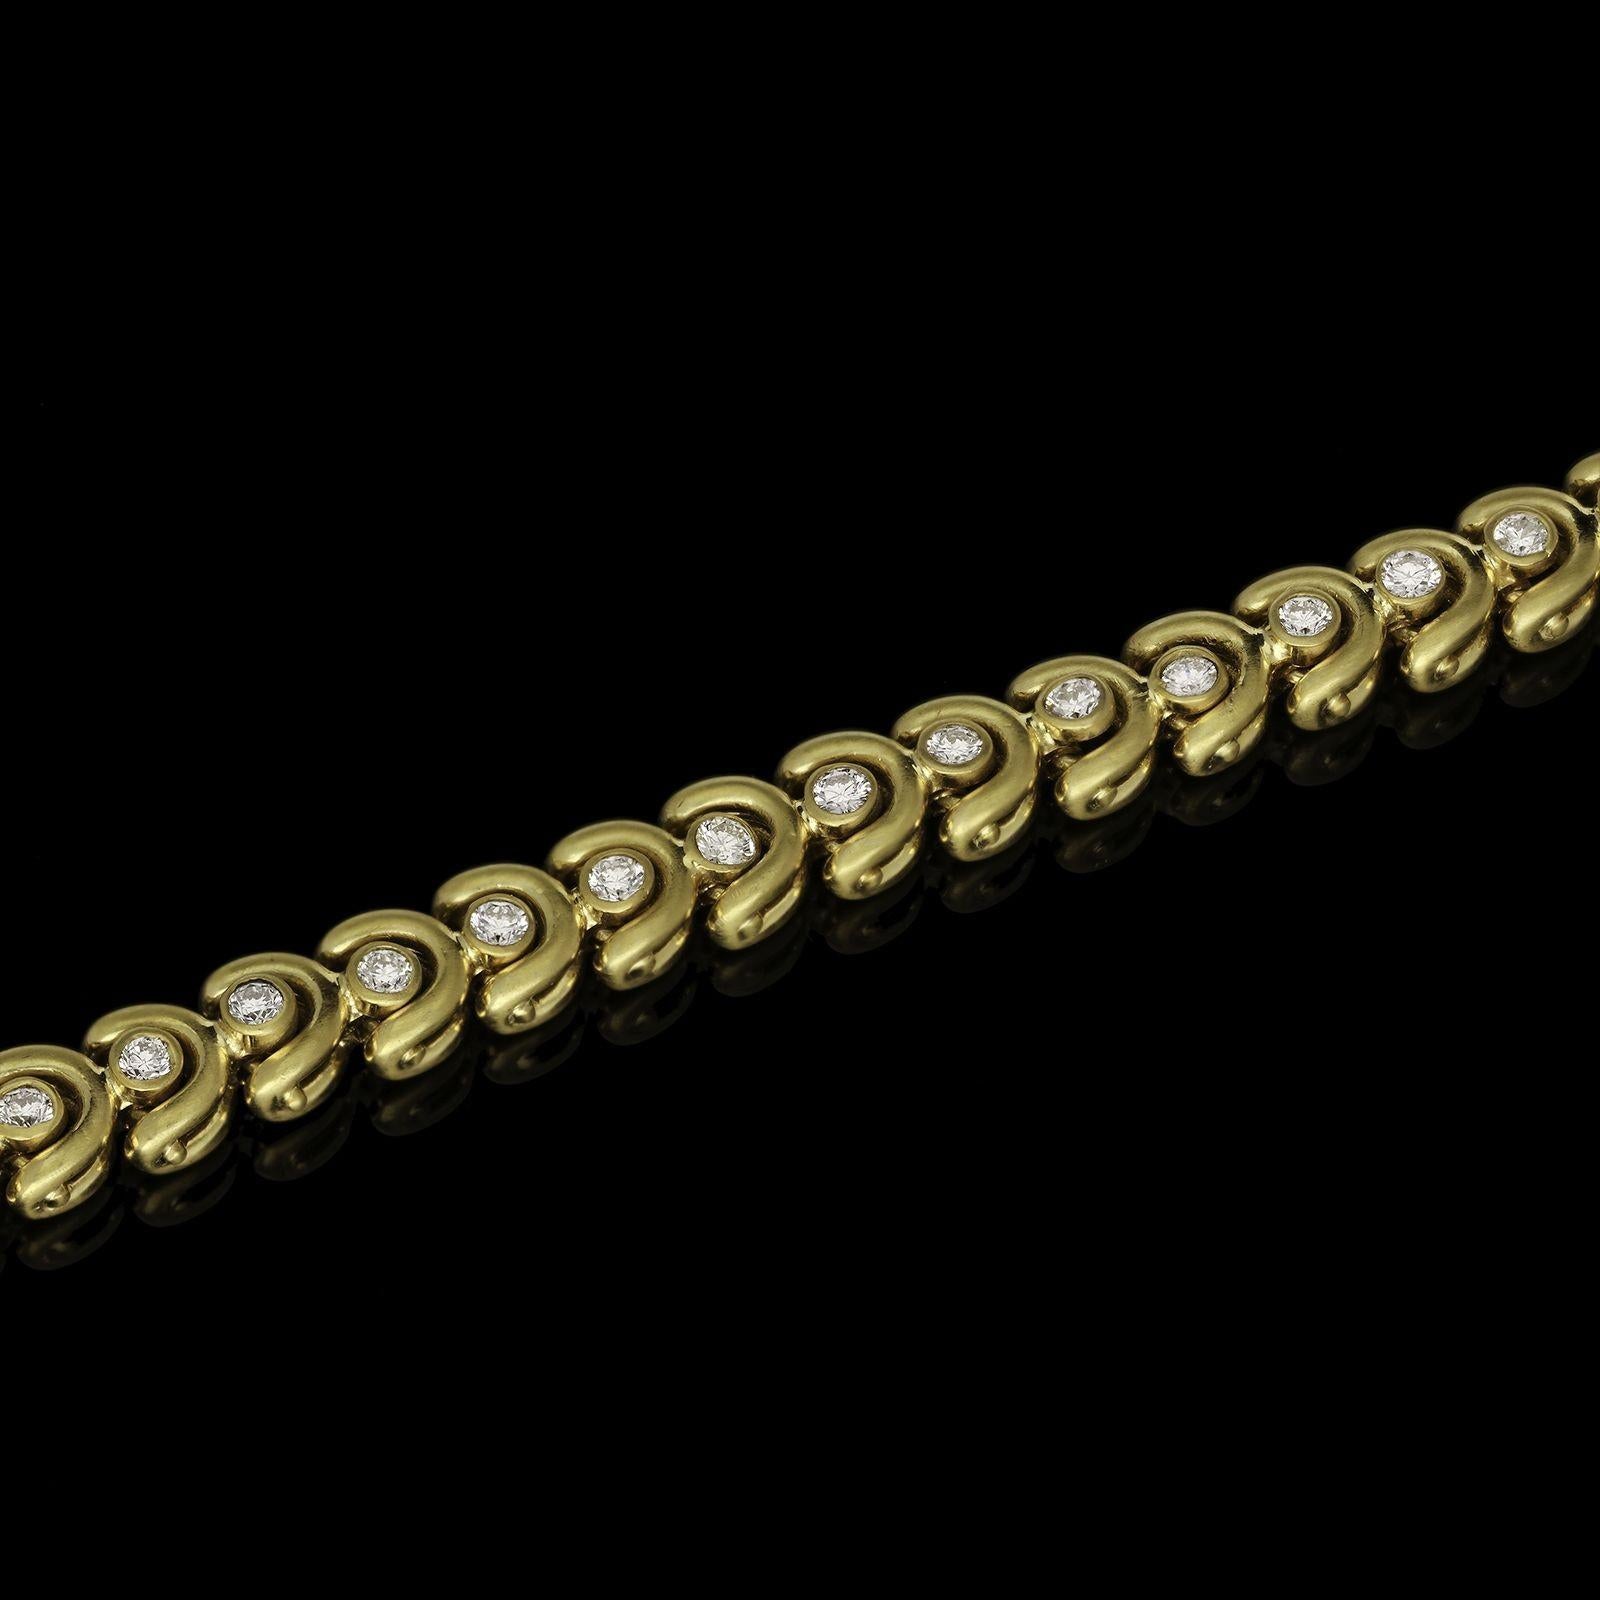 A beautifully supple vintage gold and diamond bracelet by Van Cleef & Arpels c.1955, the row of thirty-one uniform open links of semi-circular shape formed of brushed yellow gold and set with a round brilliant cut diamond in rub over setting, to a